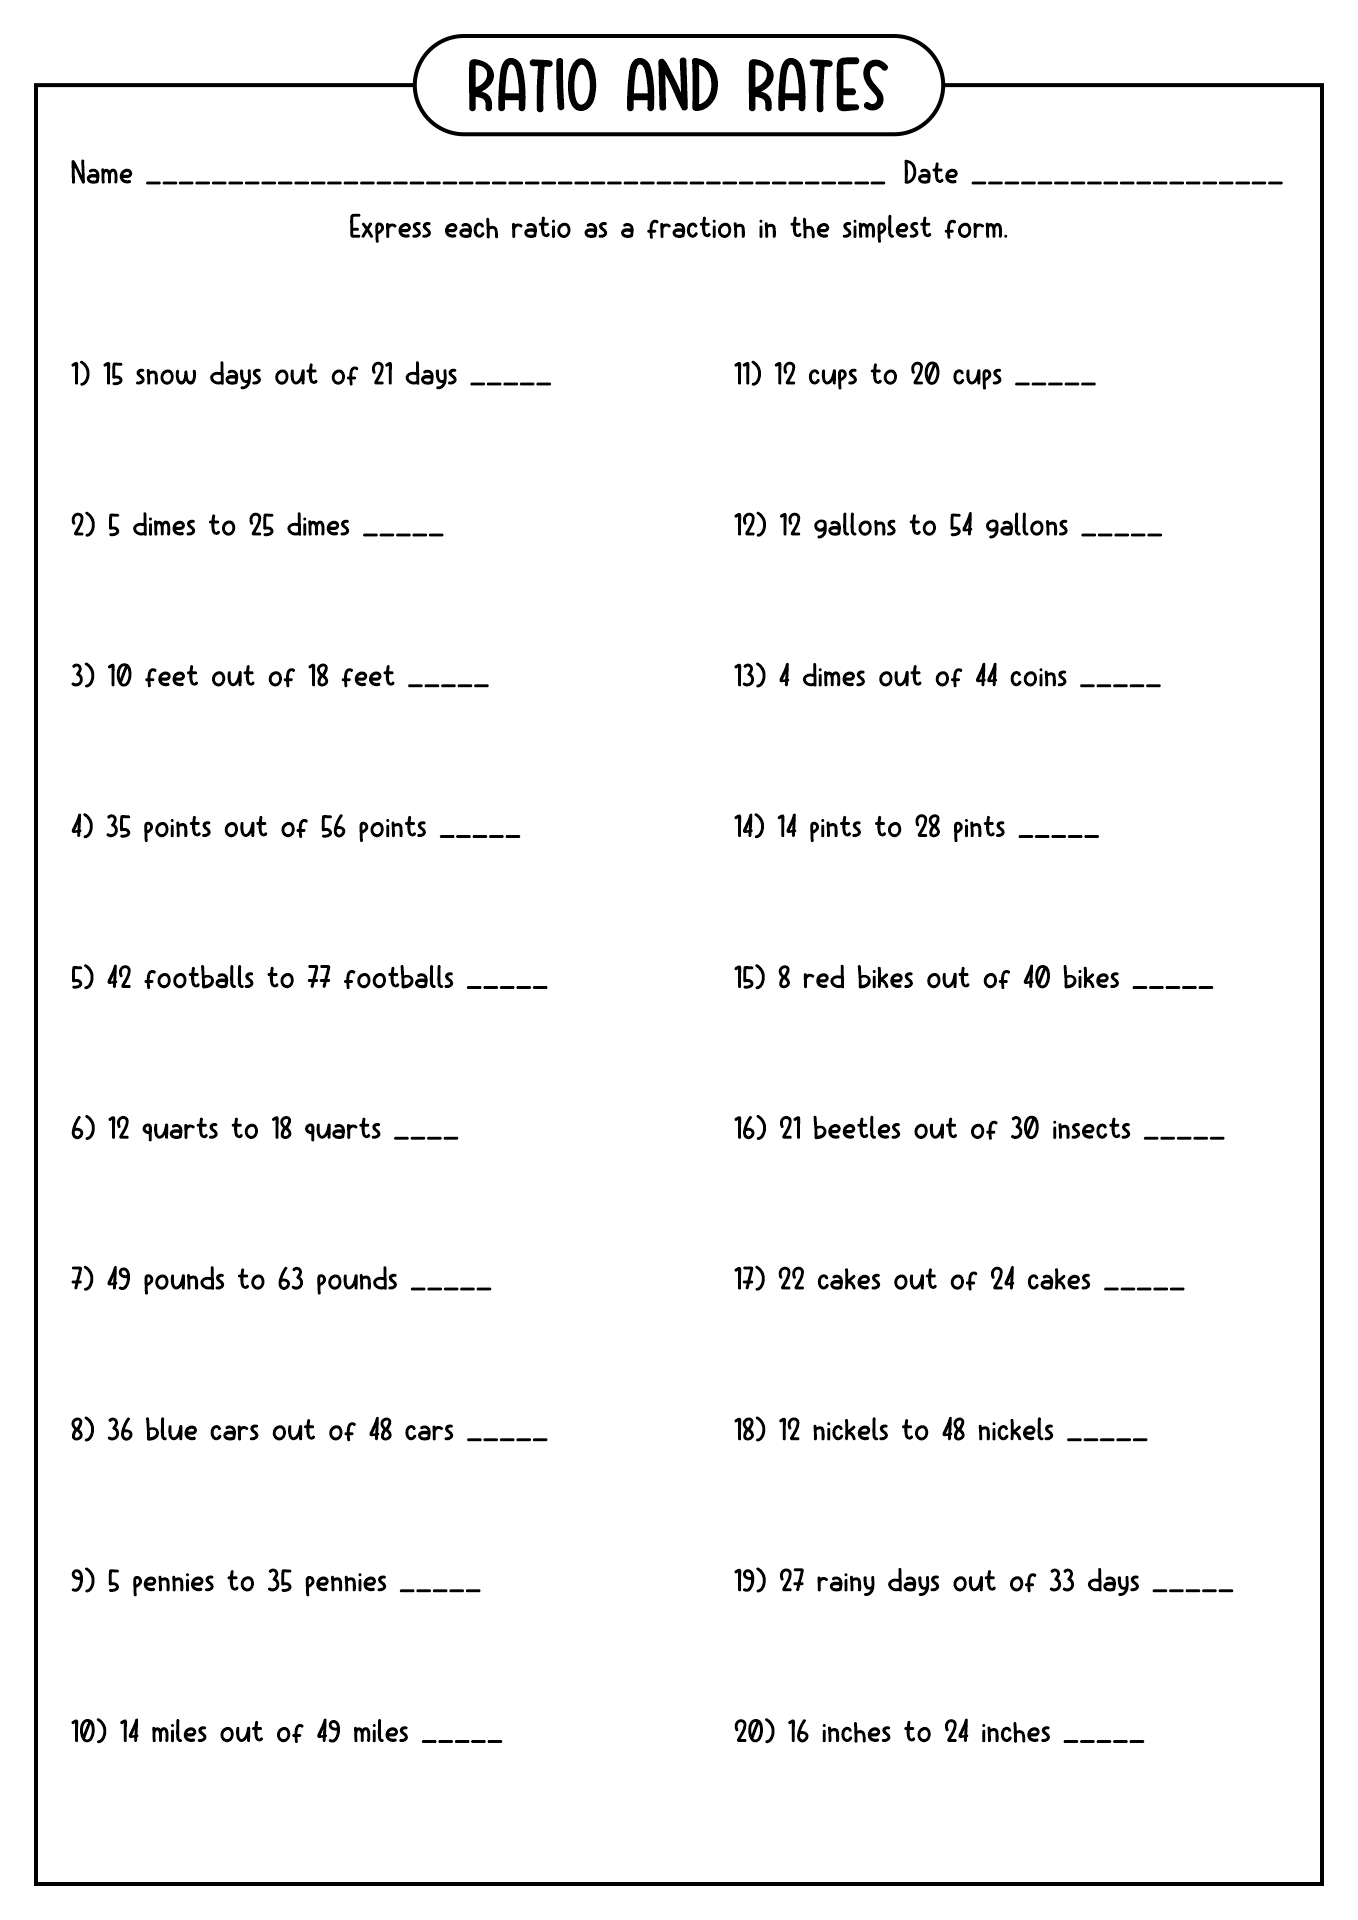 10-best-images-of-proportion-problems-worksheet-6th-grade-ratio